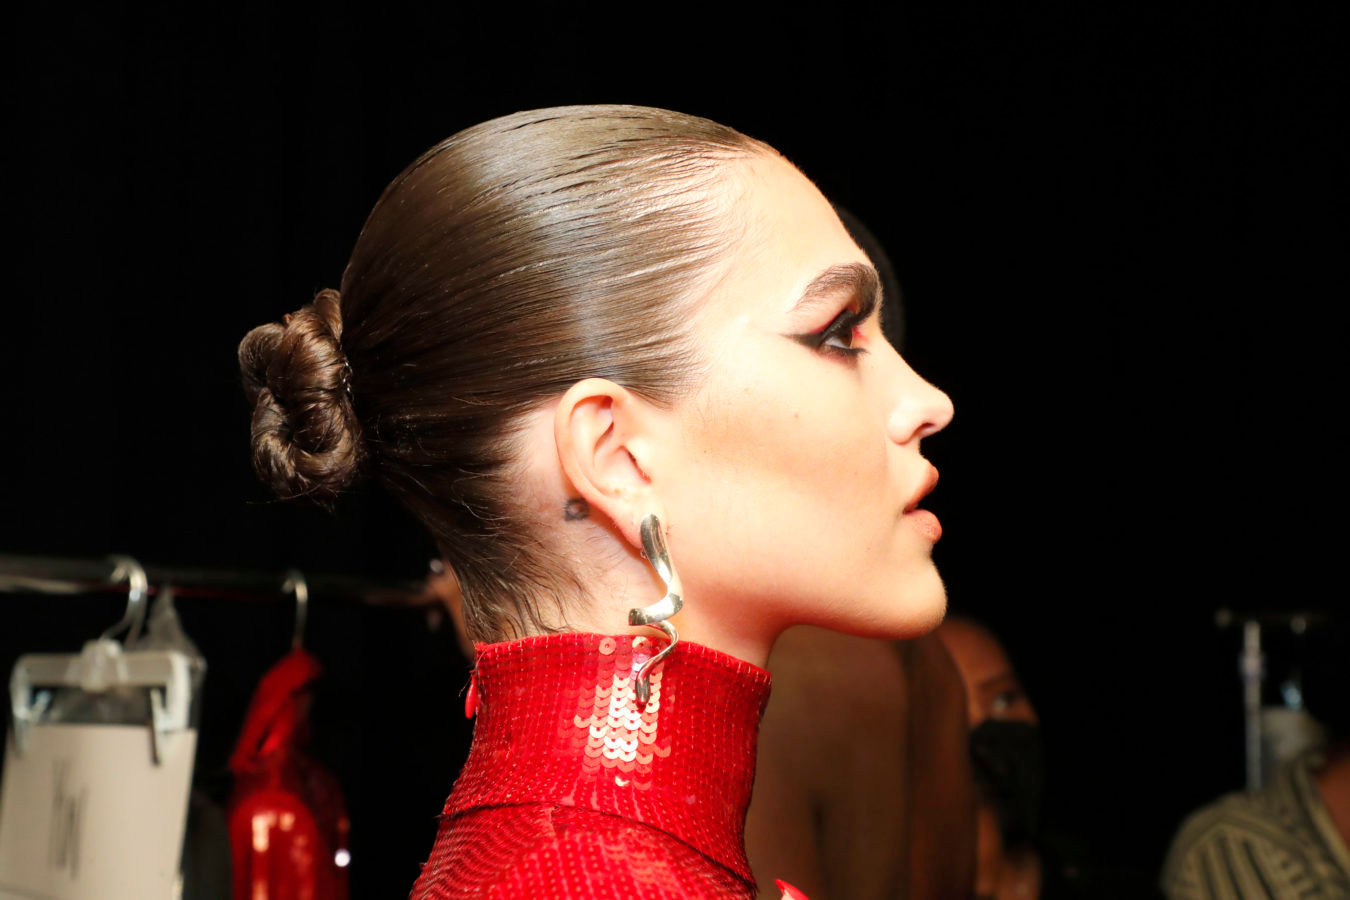 Biggest beauty trends we spotted at the New York Fashion Week 2022